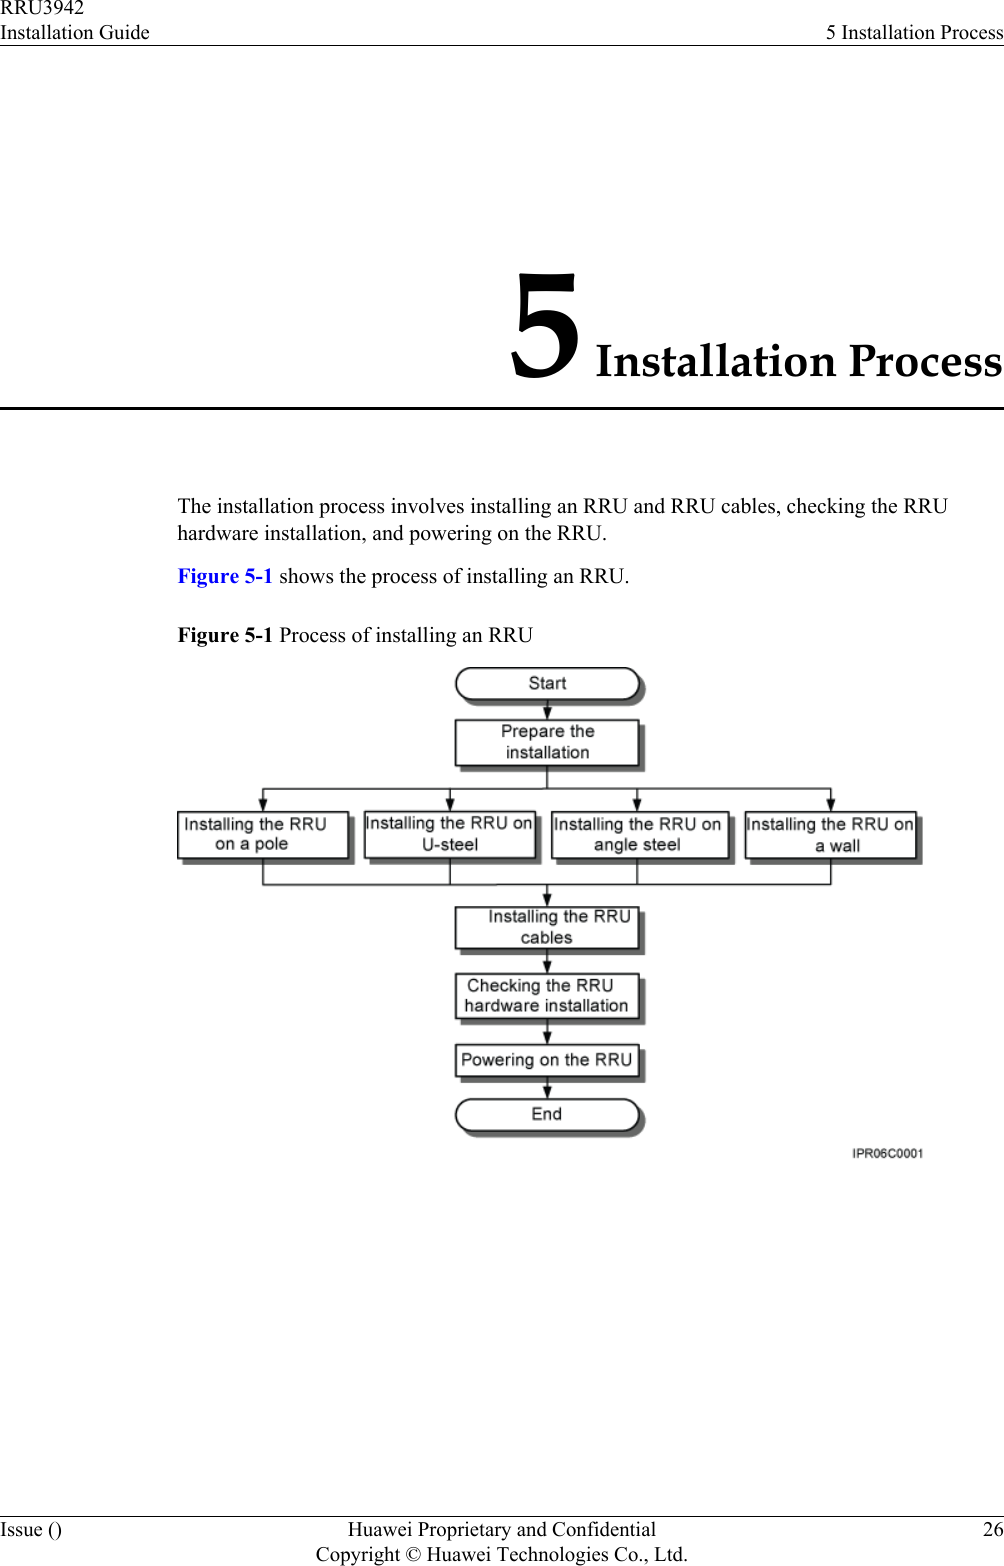 5 Installation ProcessThe installation process involves installing an RRU and RRU cables, checking the RRUhardware installation, and powering on the RRU.Figure 5-1 shows the process of installing an RRU.Figure 5-1 Process of installing an RRURRU3942Installation Guide 5 Installation ProcessIssue () Huawei Proprietary and ConfidentialCopyright © Huawei Technologies Co., Ltd.26